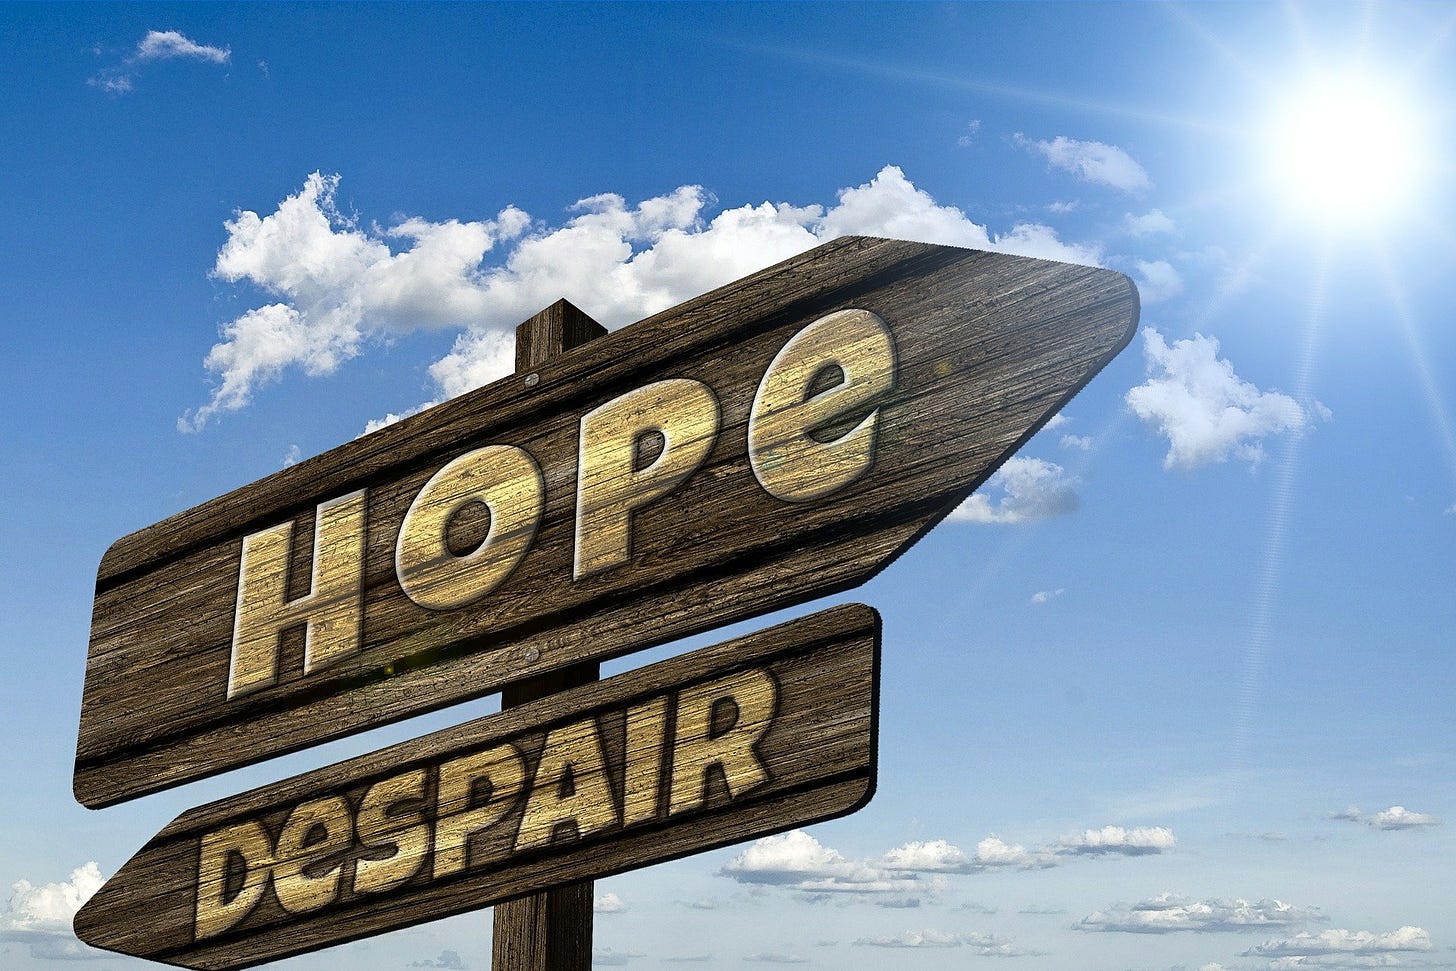 brown wooden arrow with "hope" in gold letters on signpost above "despair" arrow pointing the other way